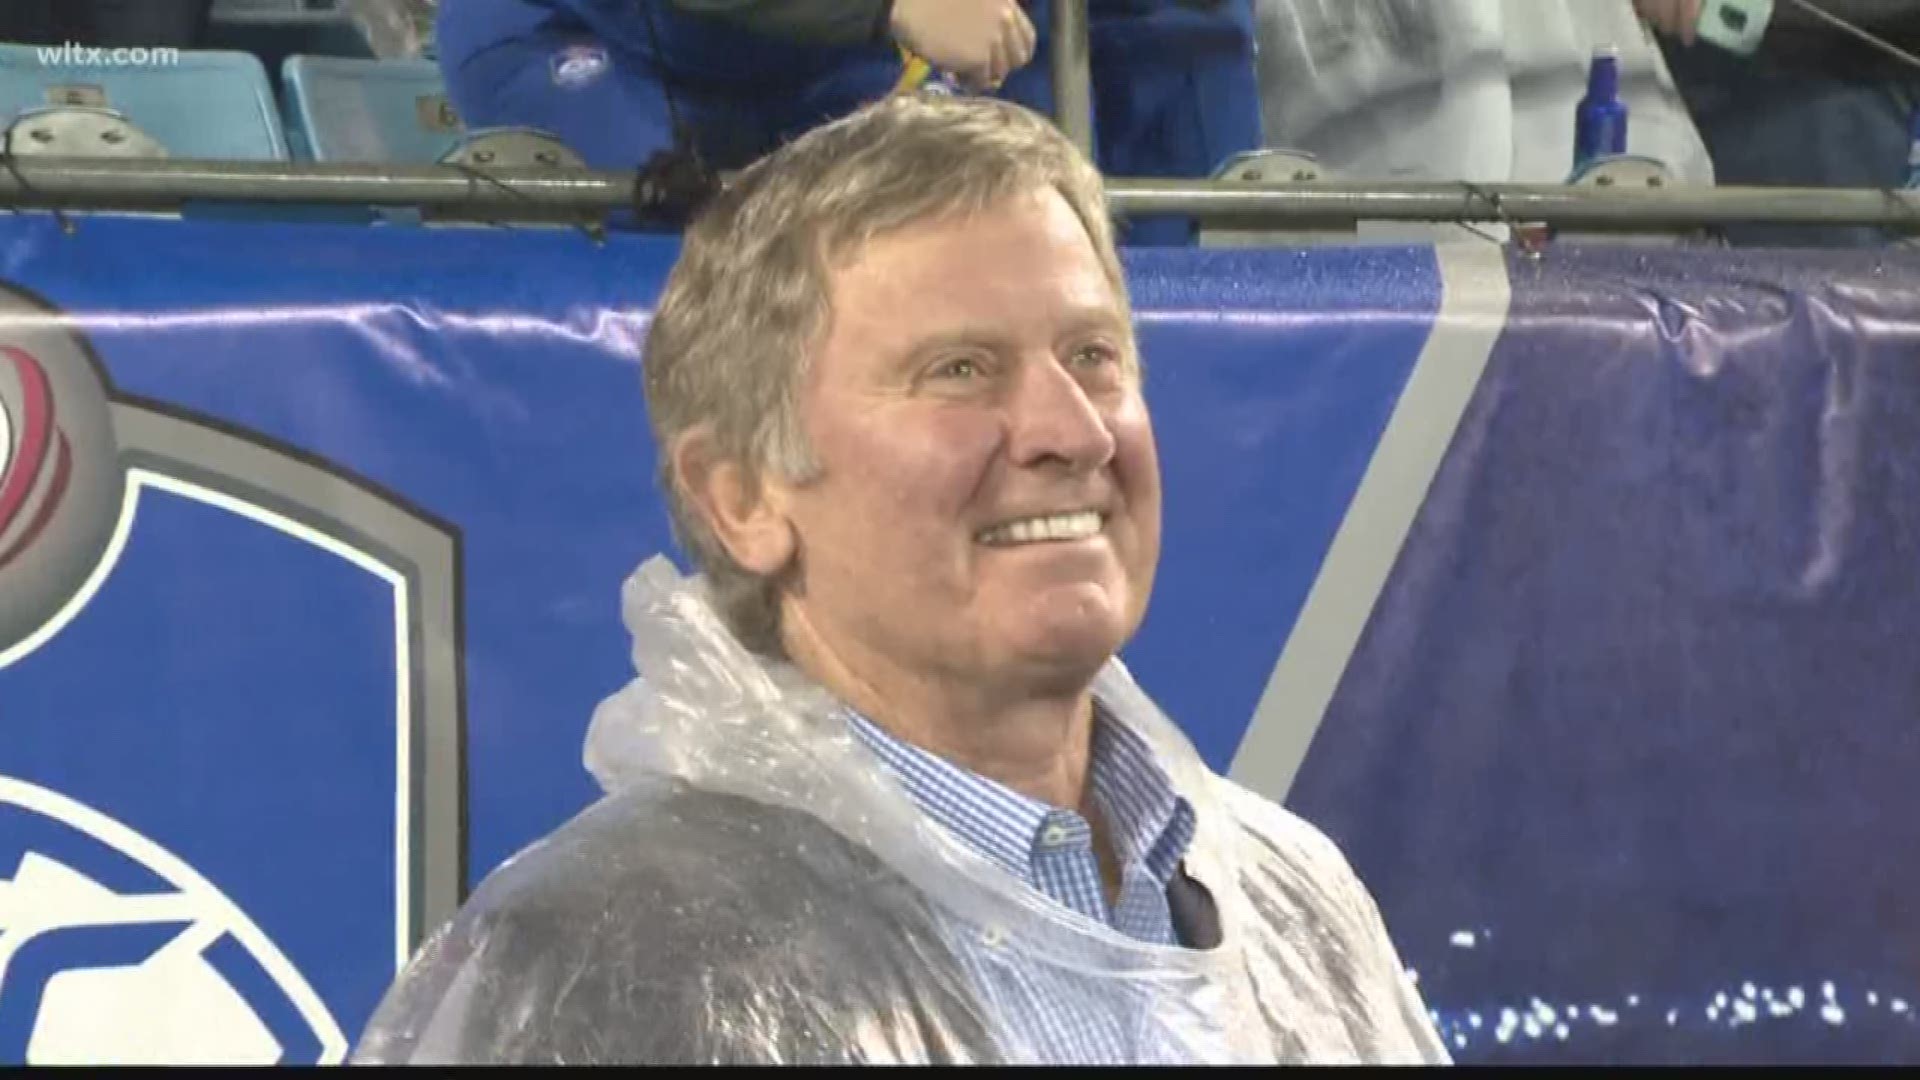 Steve Spurrier was at the ACC Championship where he was recognized along with the rest of the 2018 ACC Football Legends class.